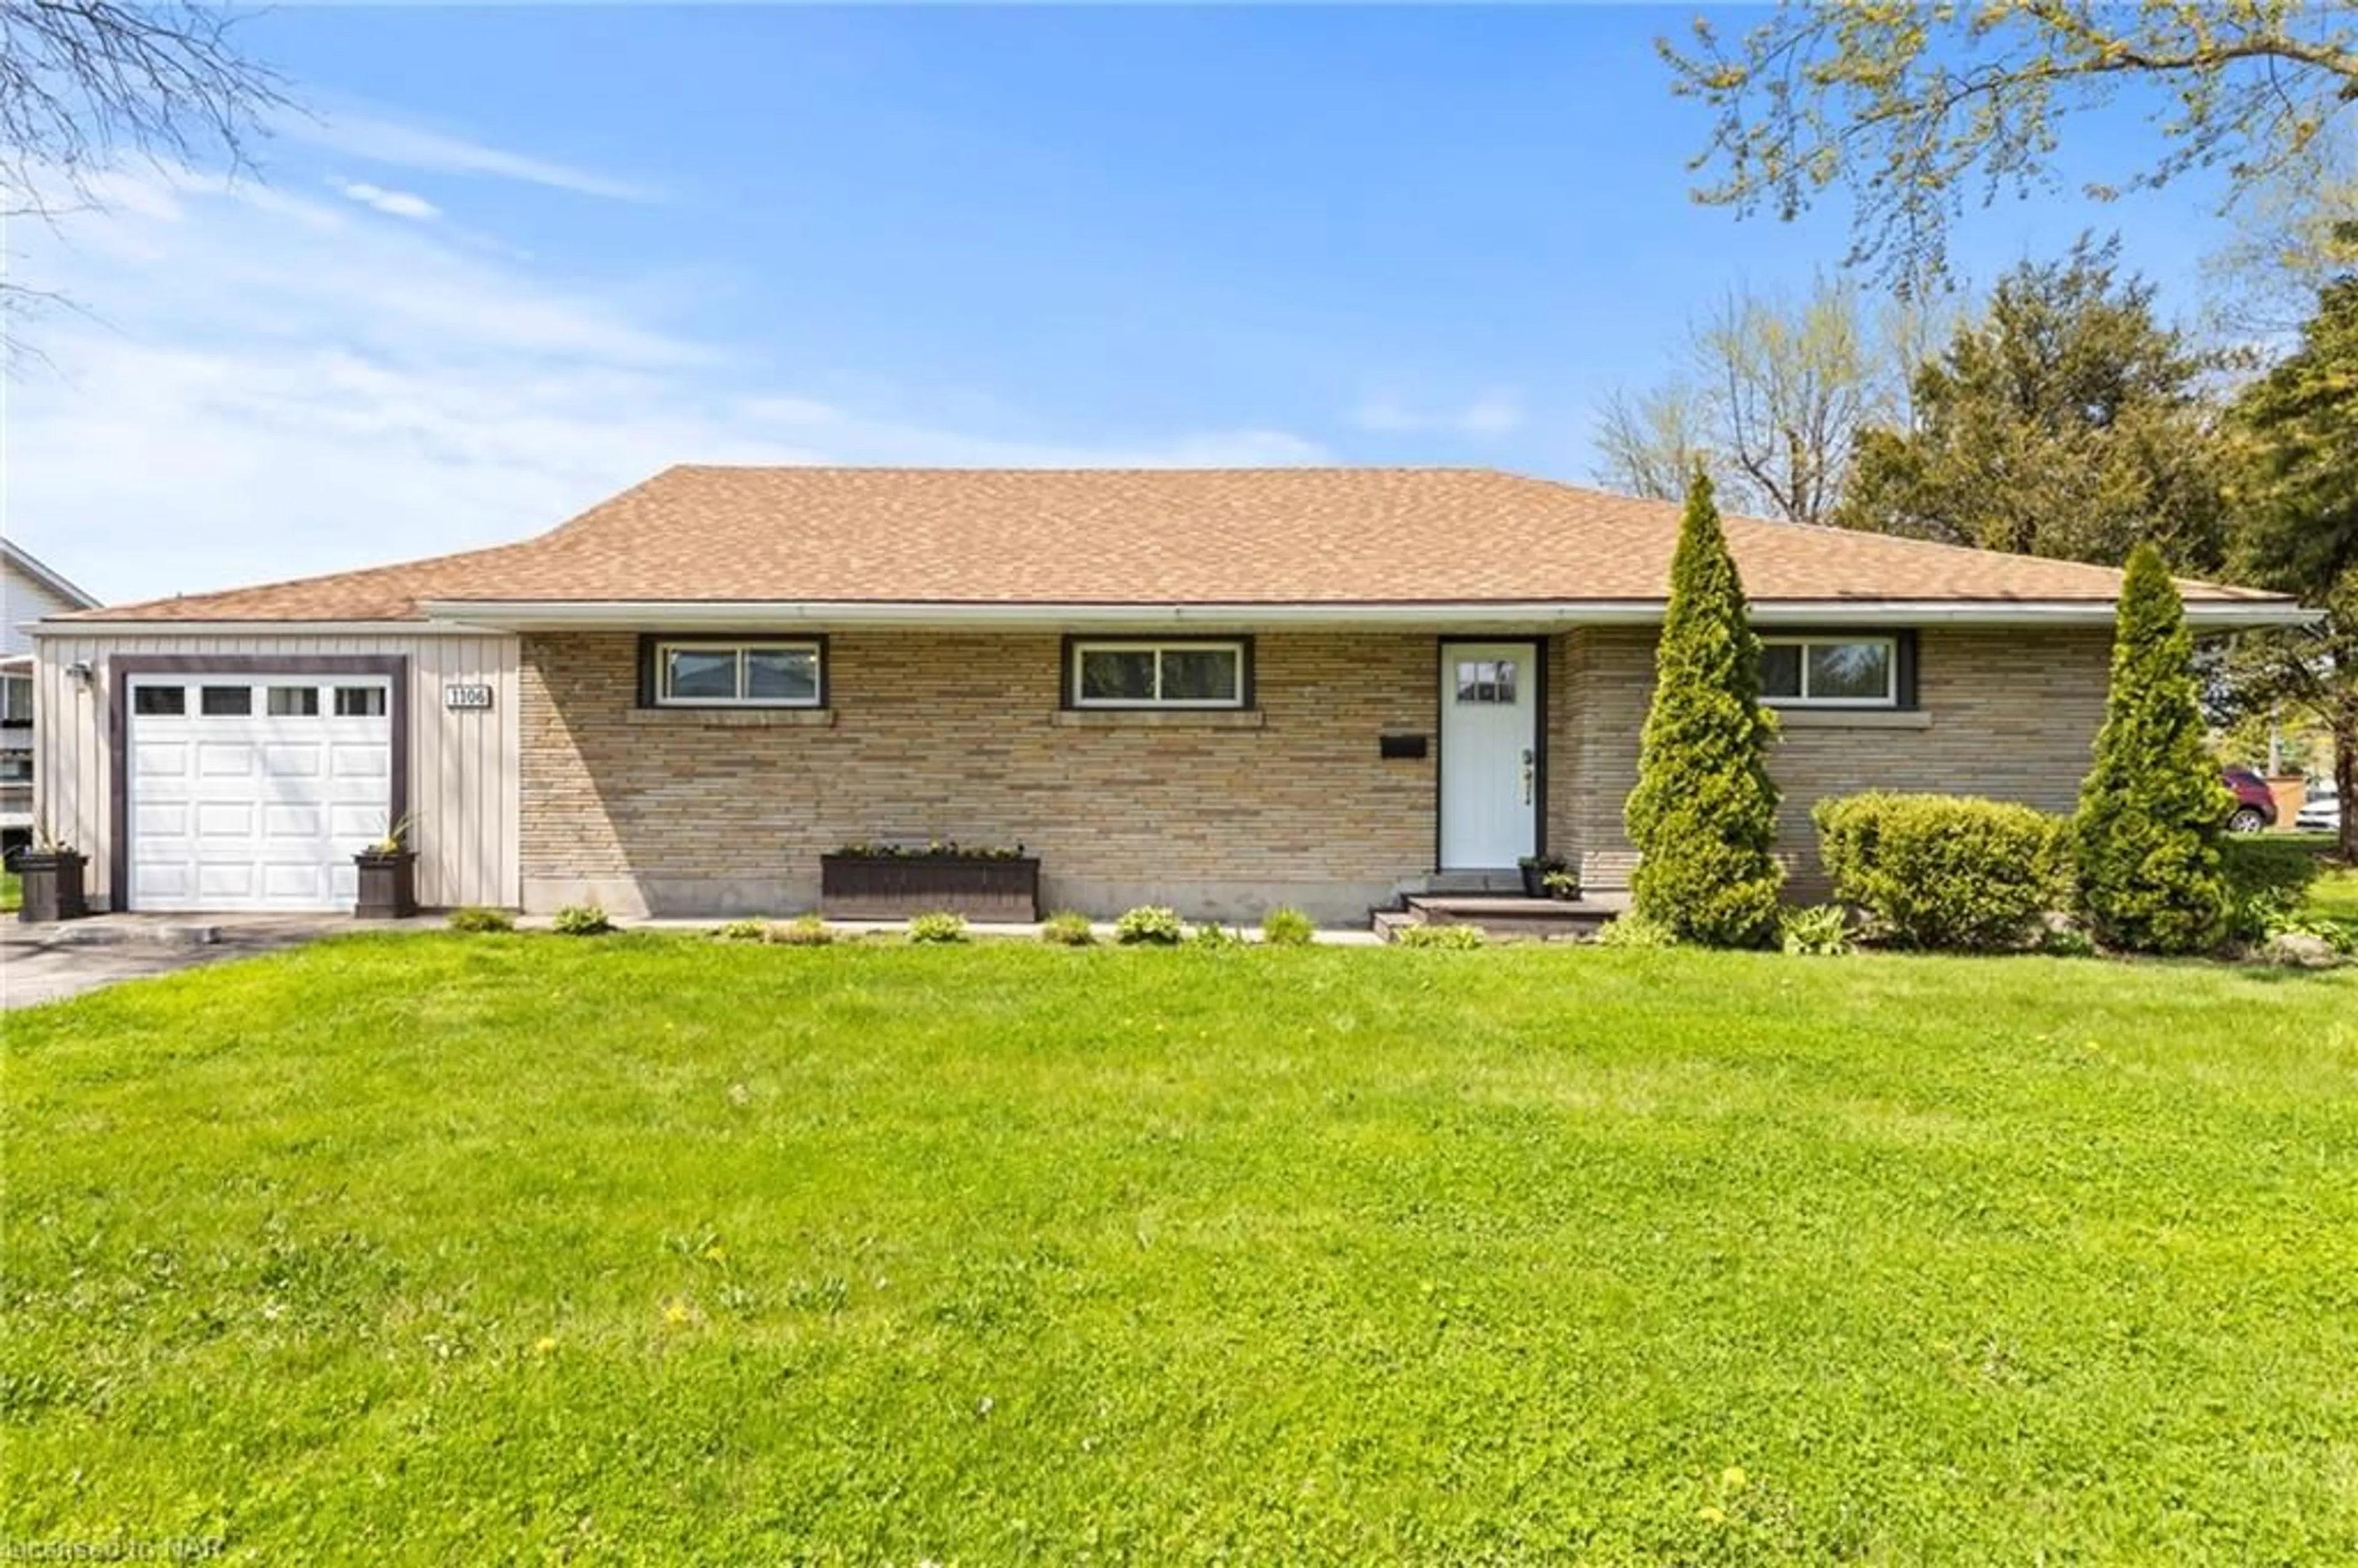 Frontside or backside of a home for 1106 Vansickle Rd, St. Catharines Ontario L2S 2Z8